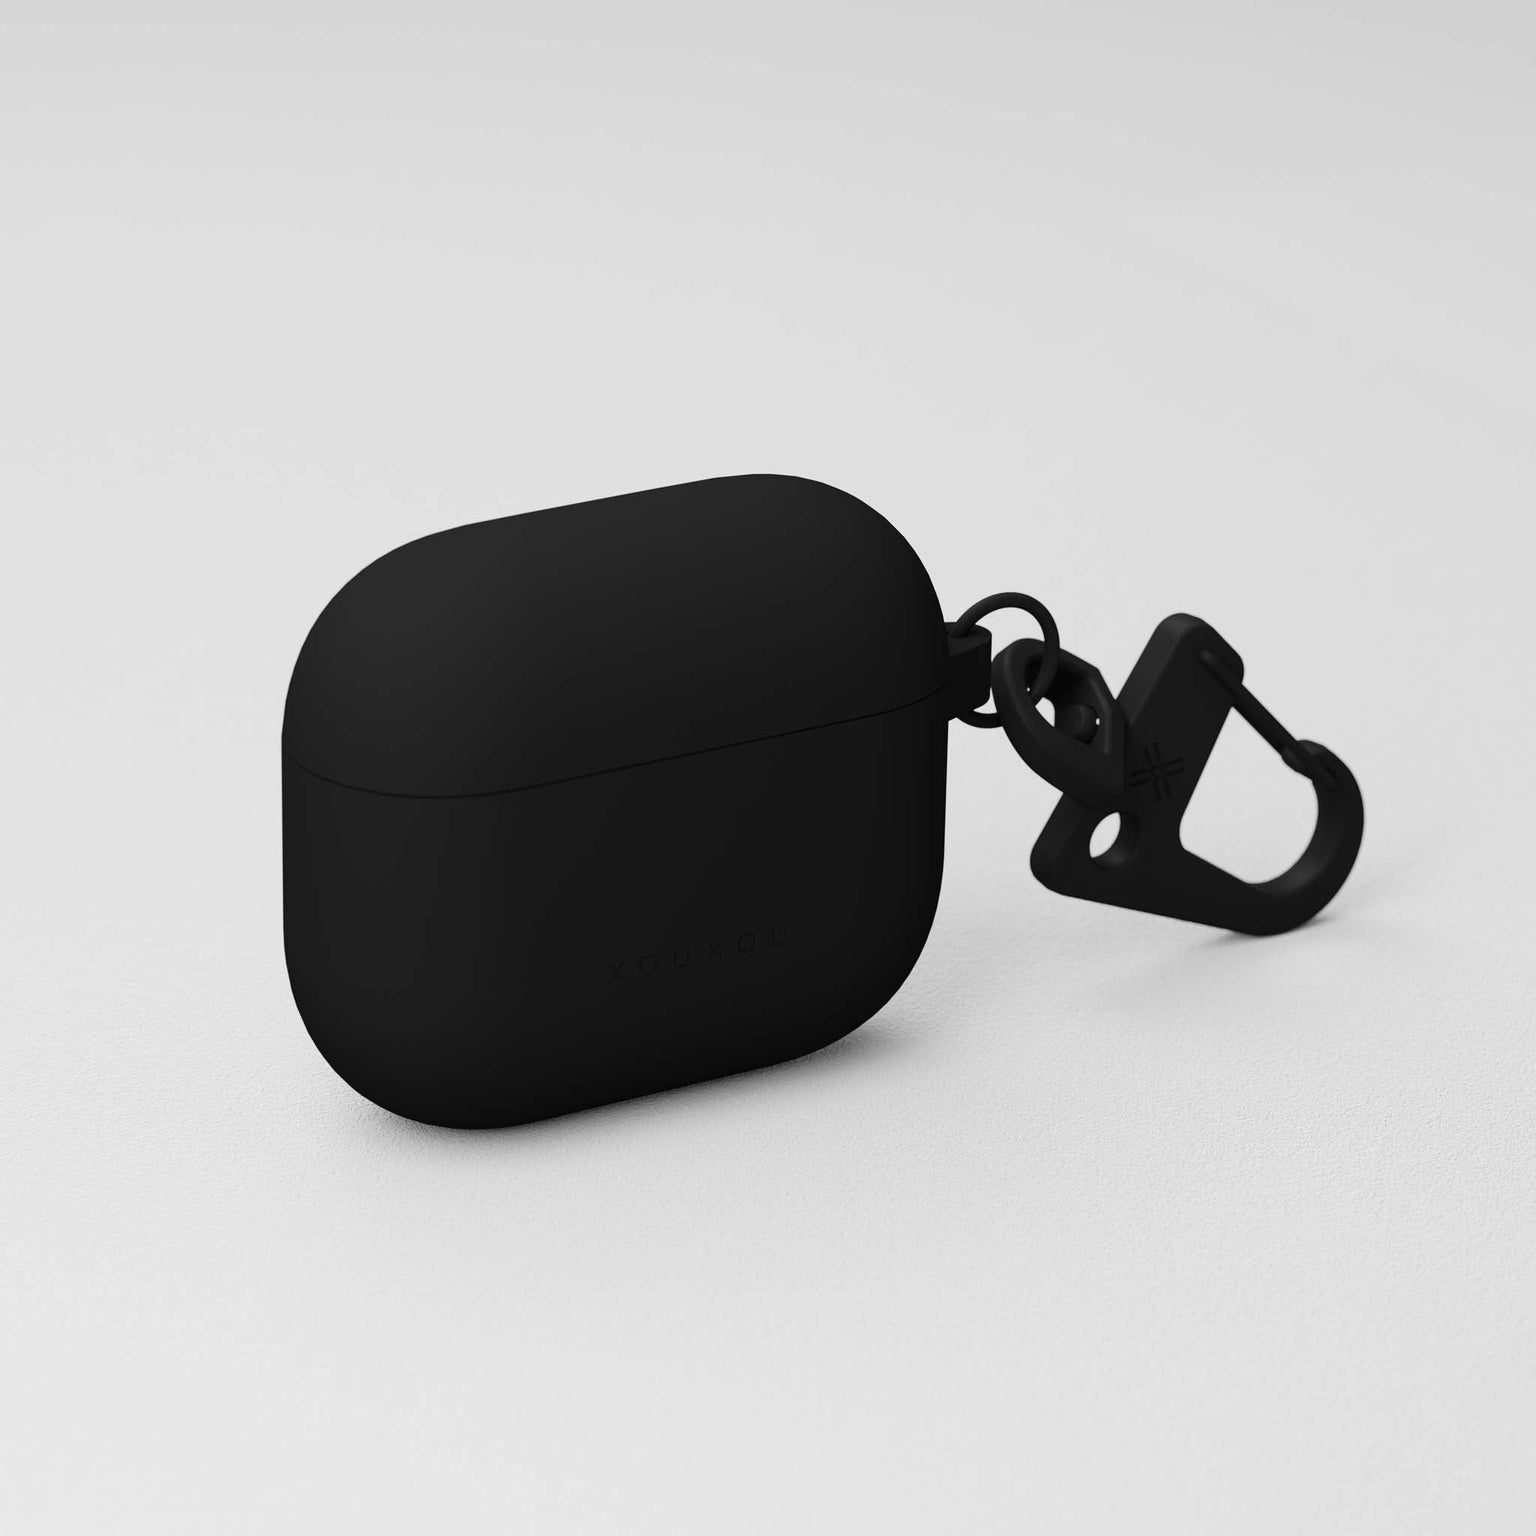 Apple AirPods case 3rd generation in Black silicone with black carabiner hook | XOUXOU